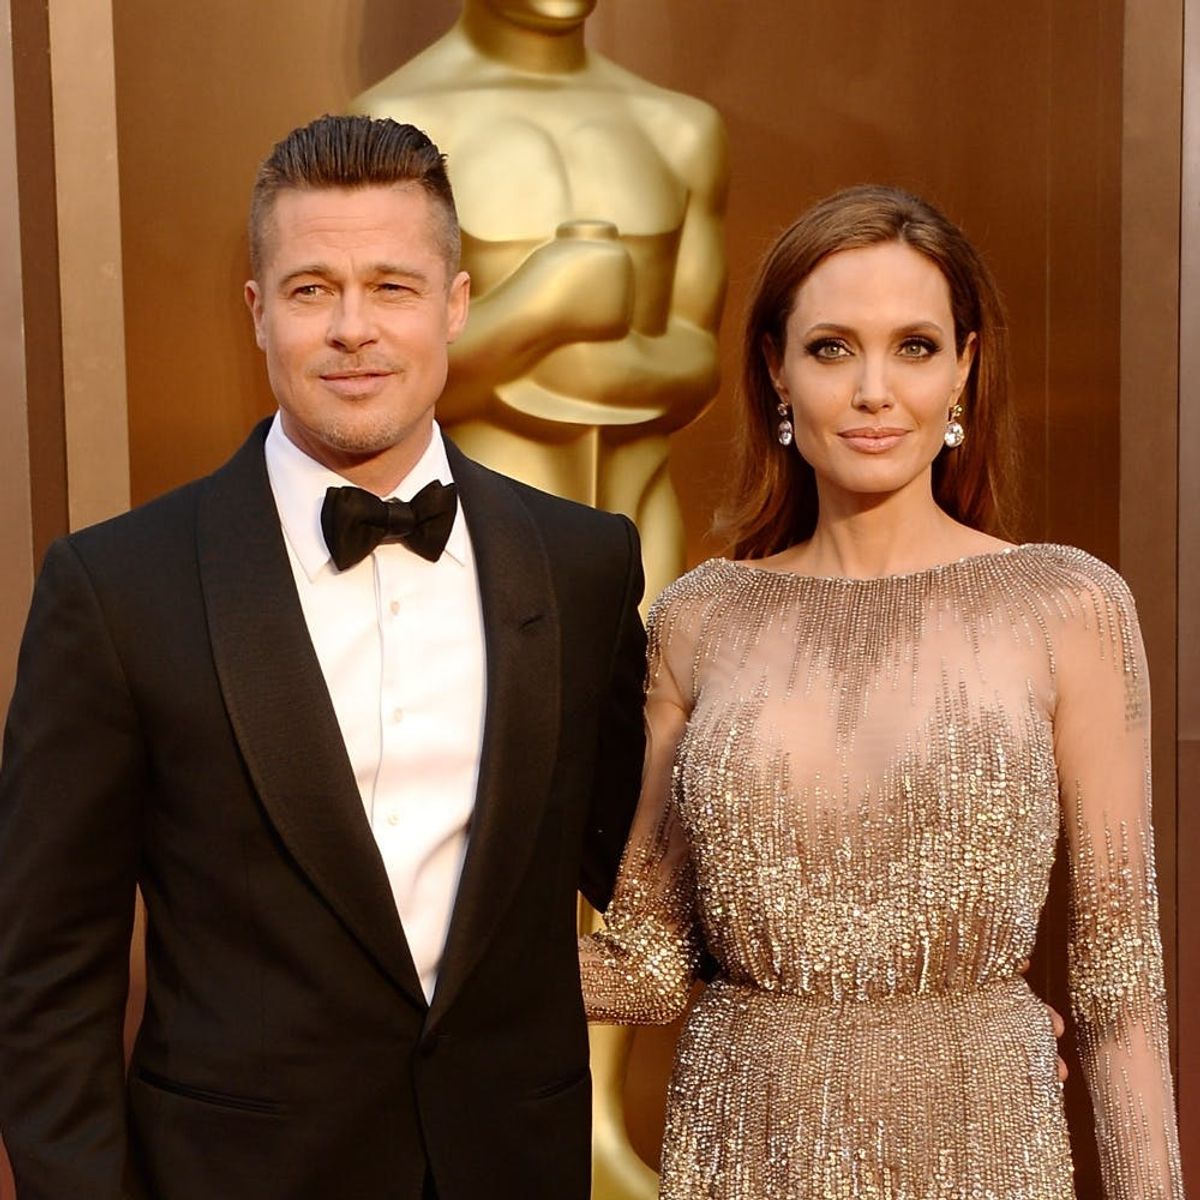 Check Out How Celebs Are Reacting to Brad and Angelina’s Divorce